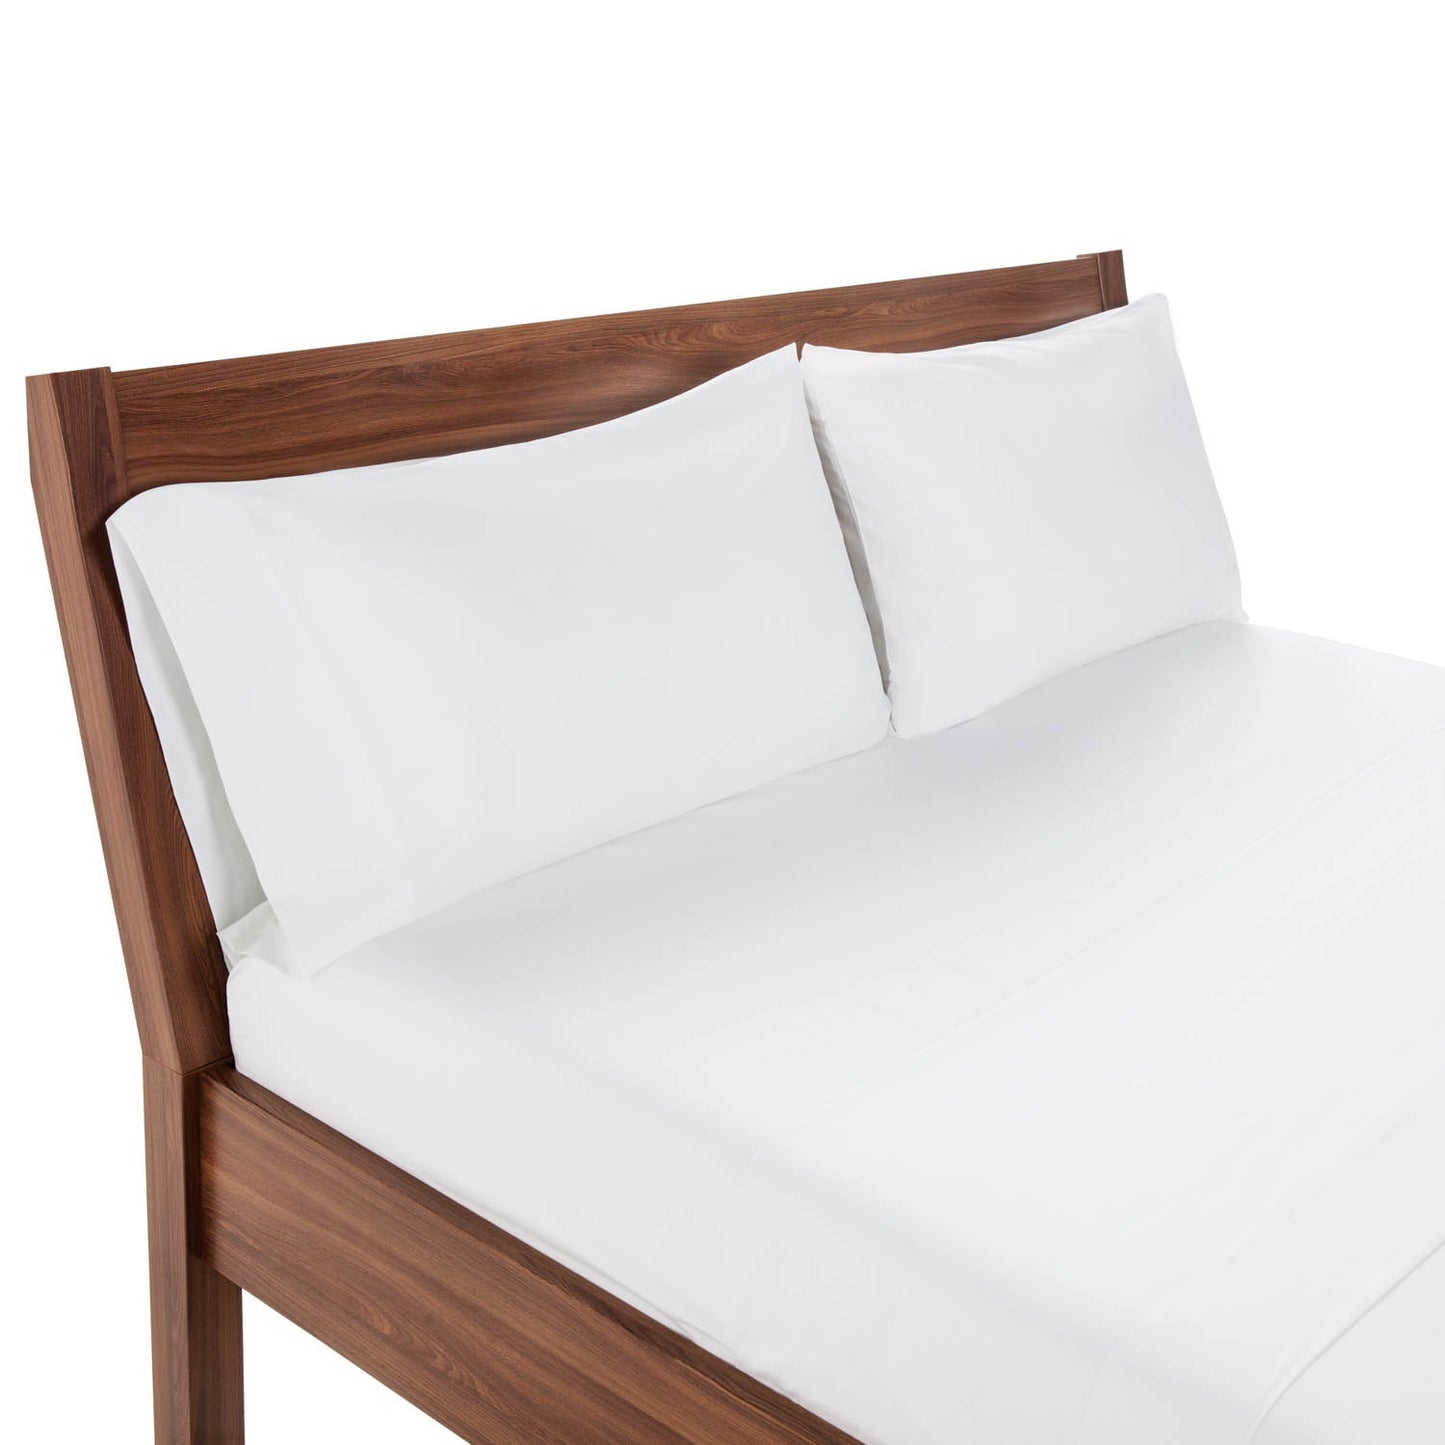 Weekender Hotel Fitted Sheet, Full, White